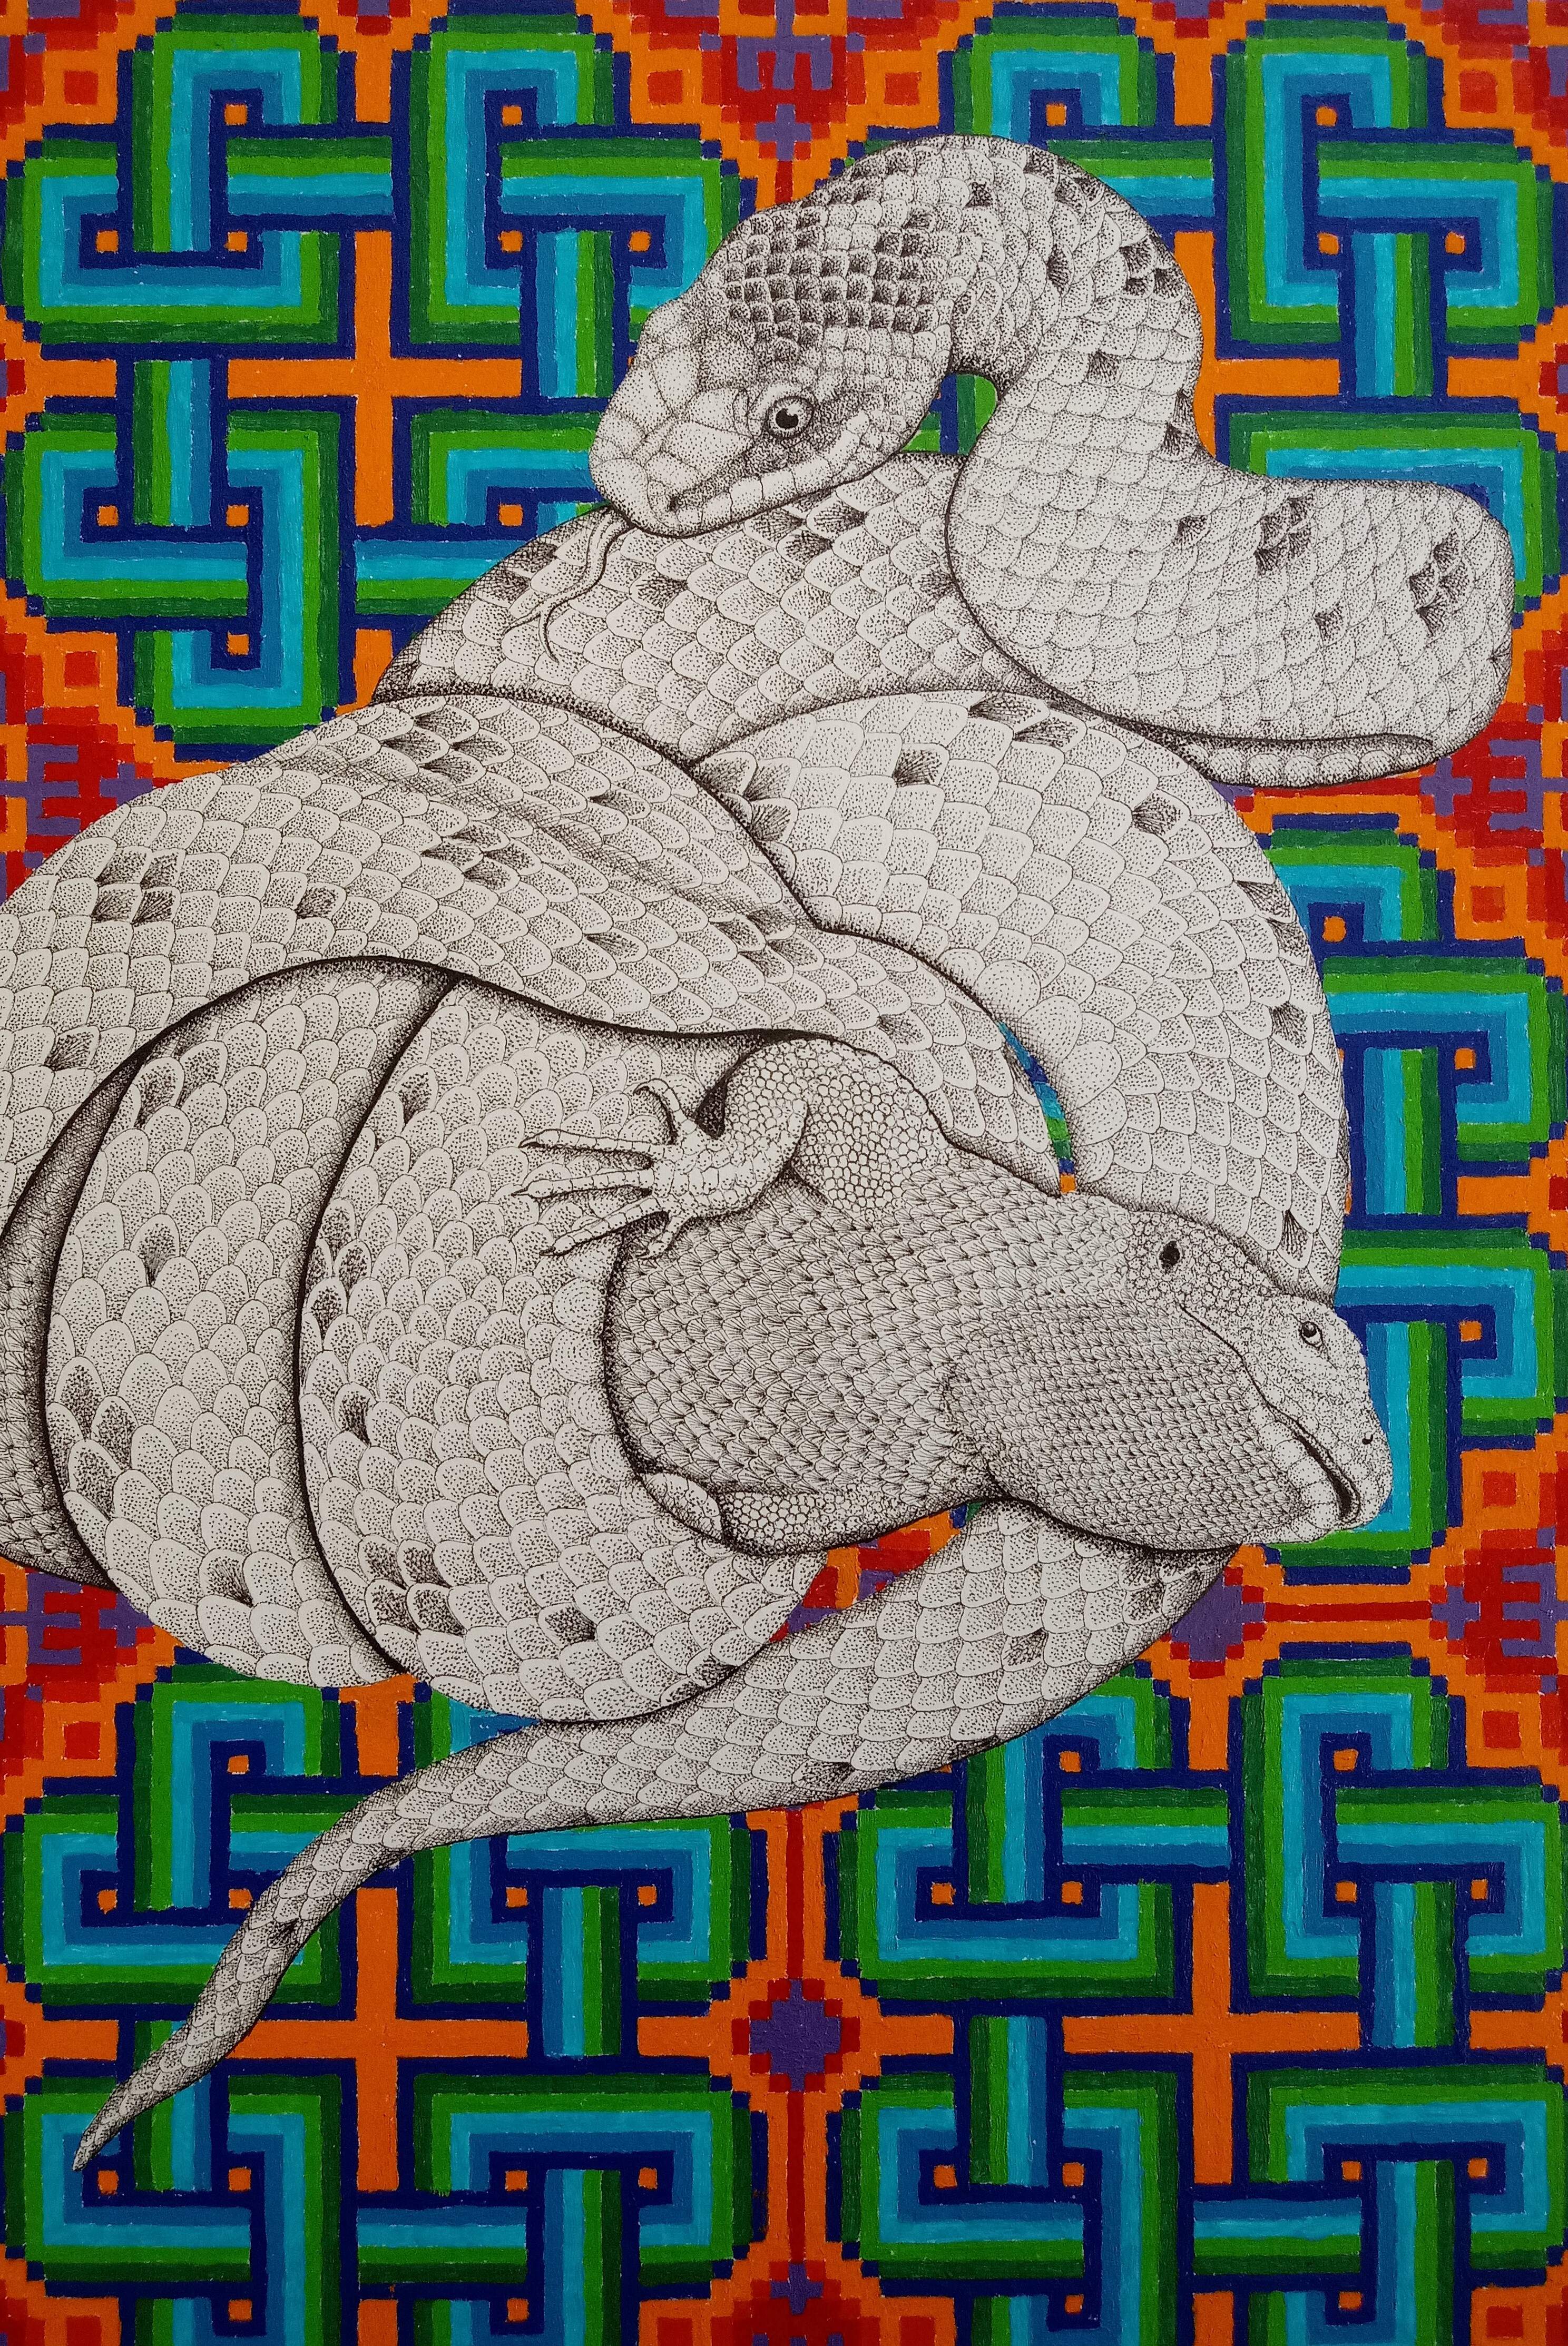 2021, Acrylic and ink on Hahnemühle paper, for "Fantastic Austrian Reptiles", 20x30cm